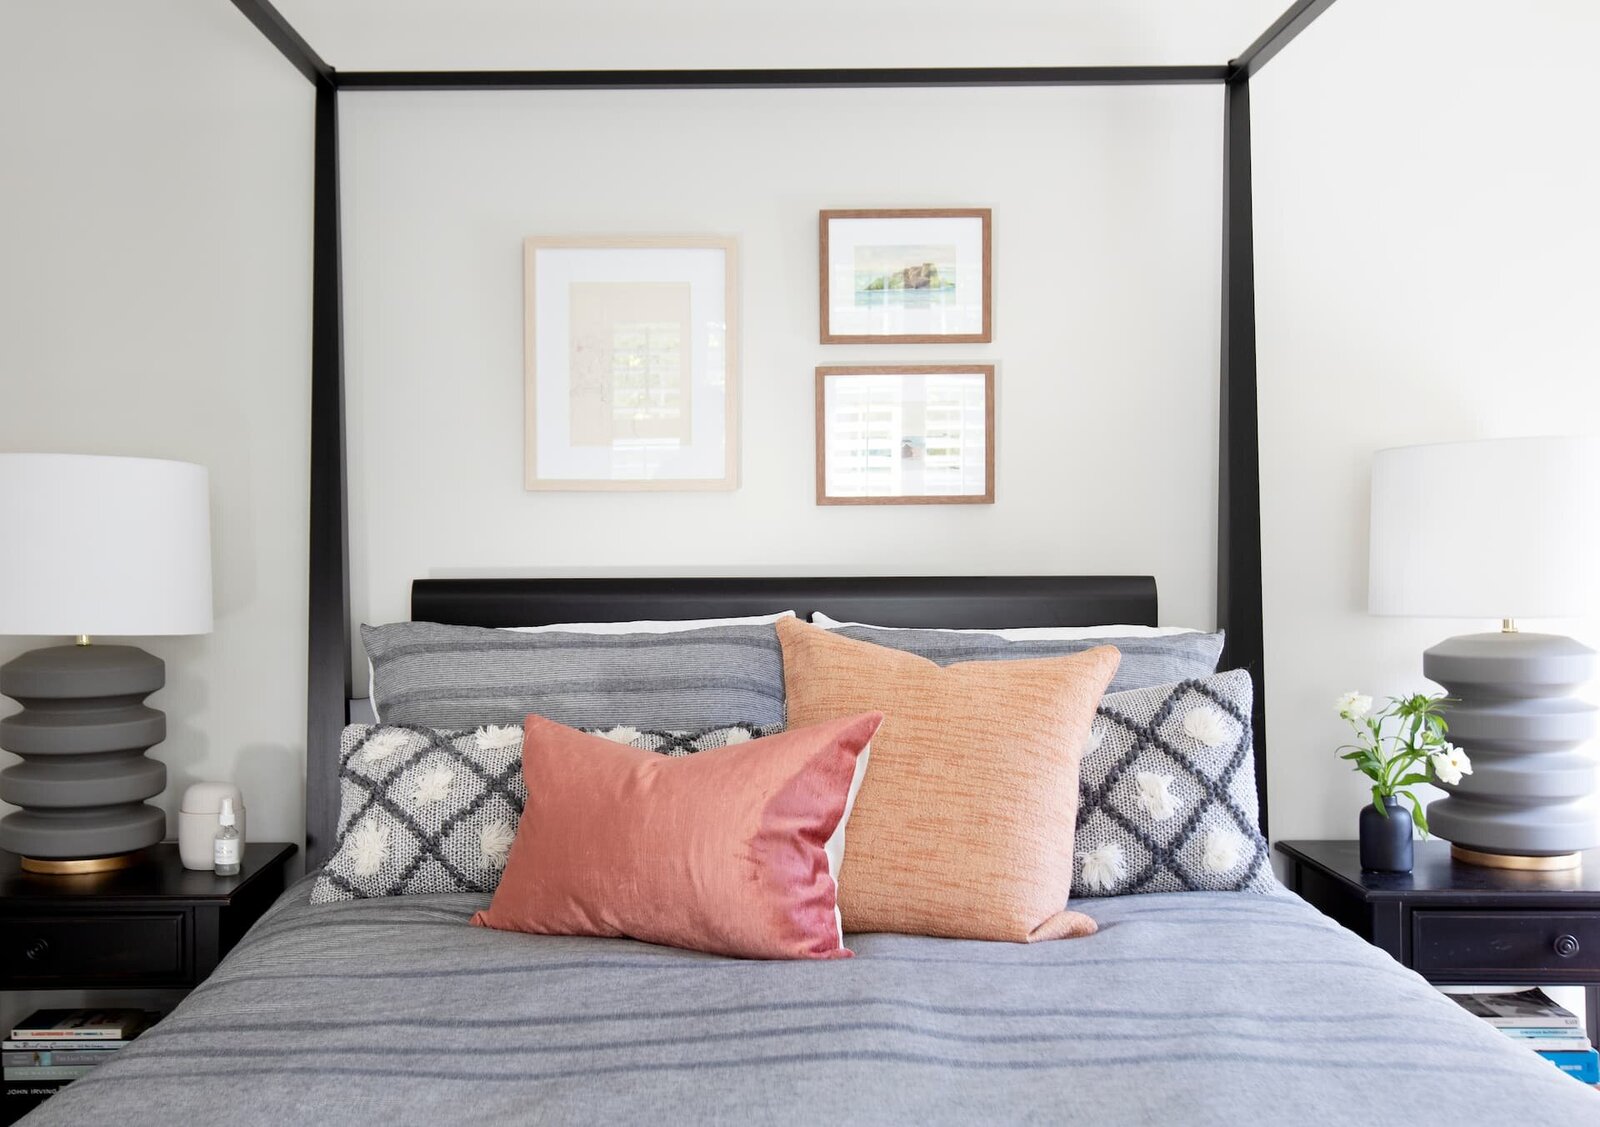 Granville Street l Canopy Bed with Peachy Tone Pillows and Mini Gallery Wall above Bed